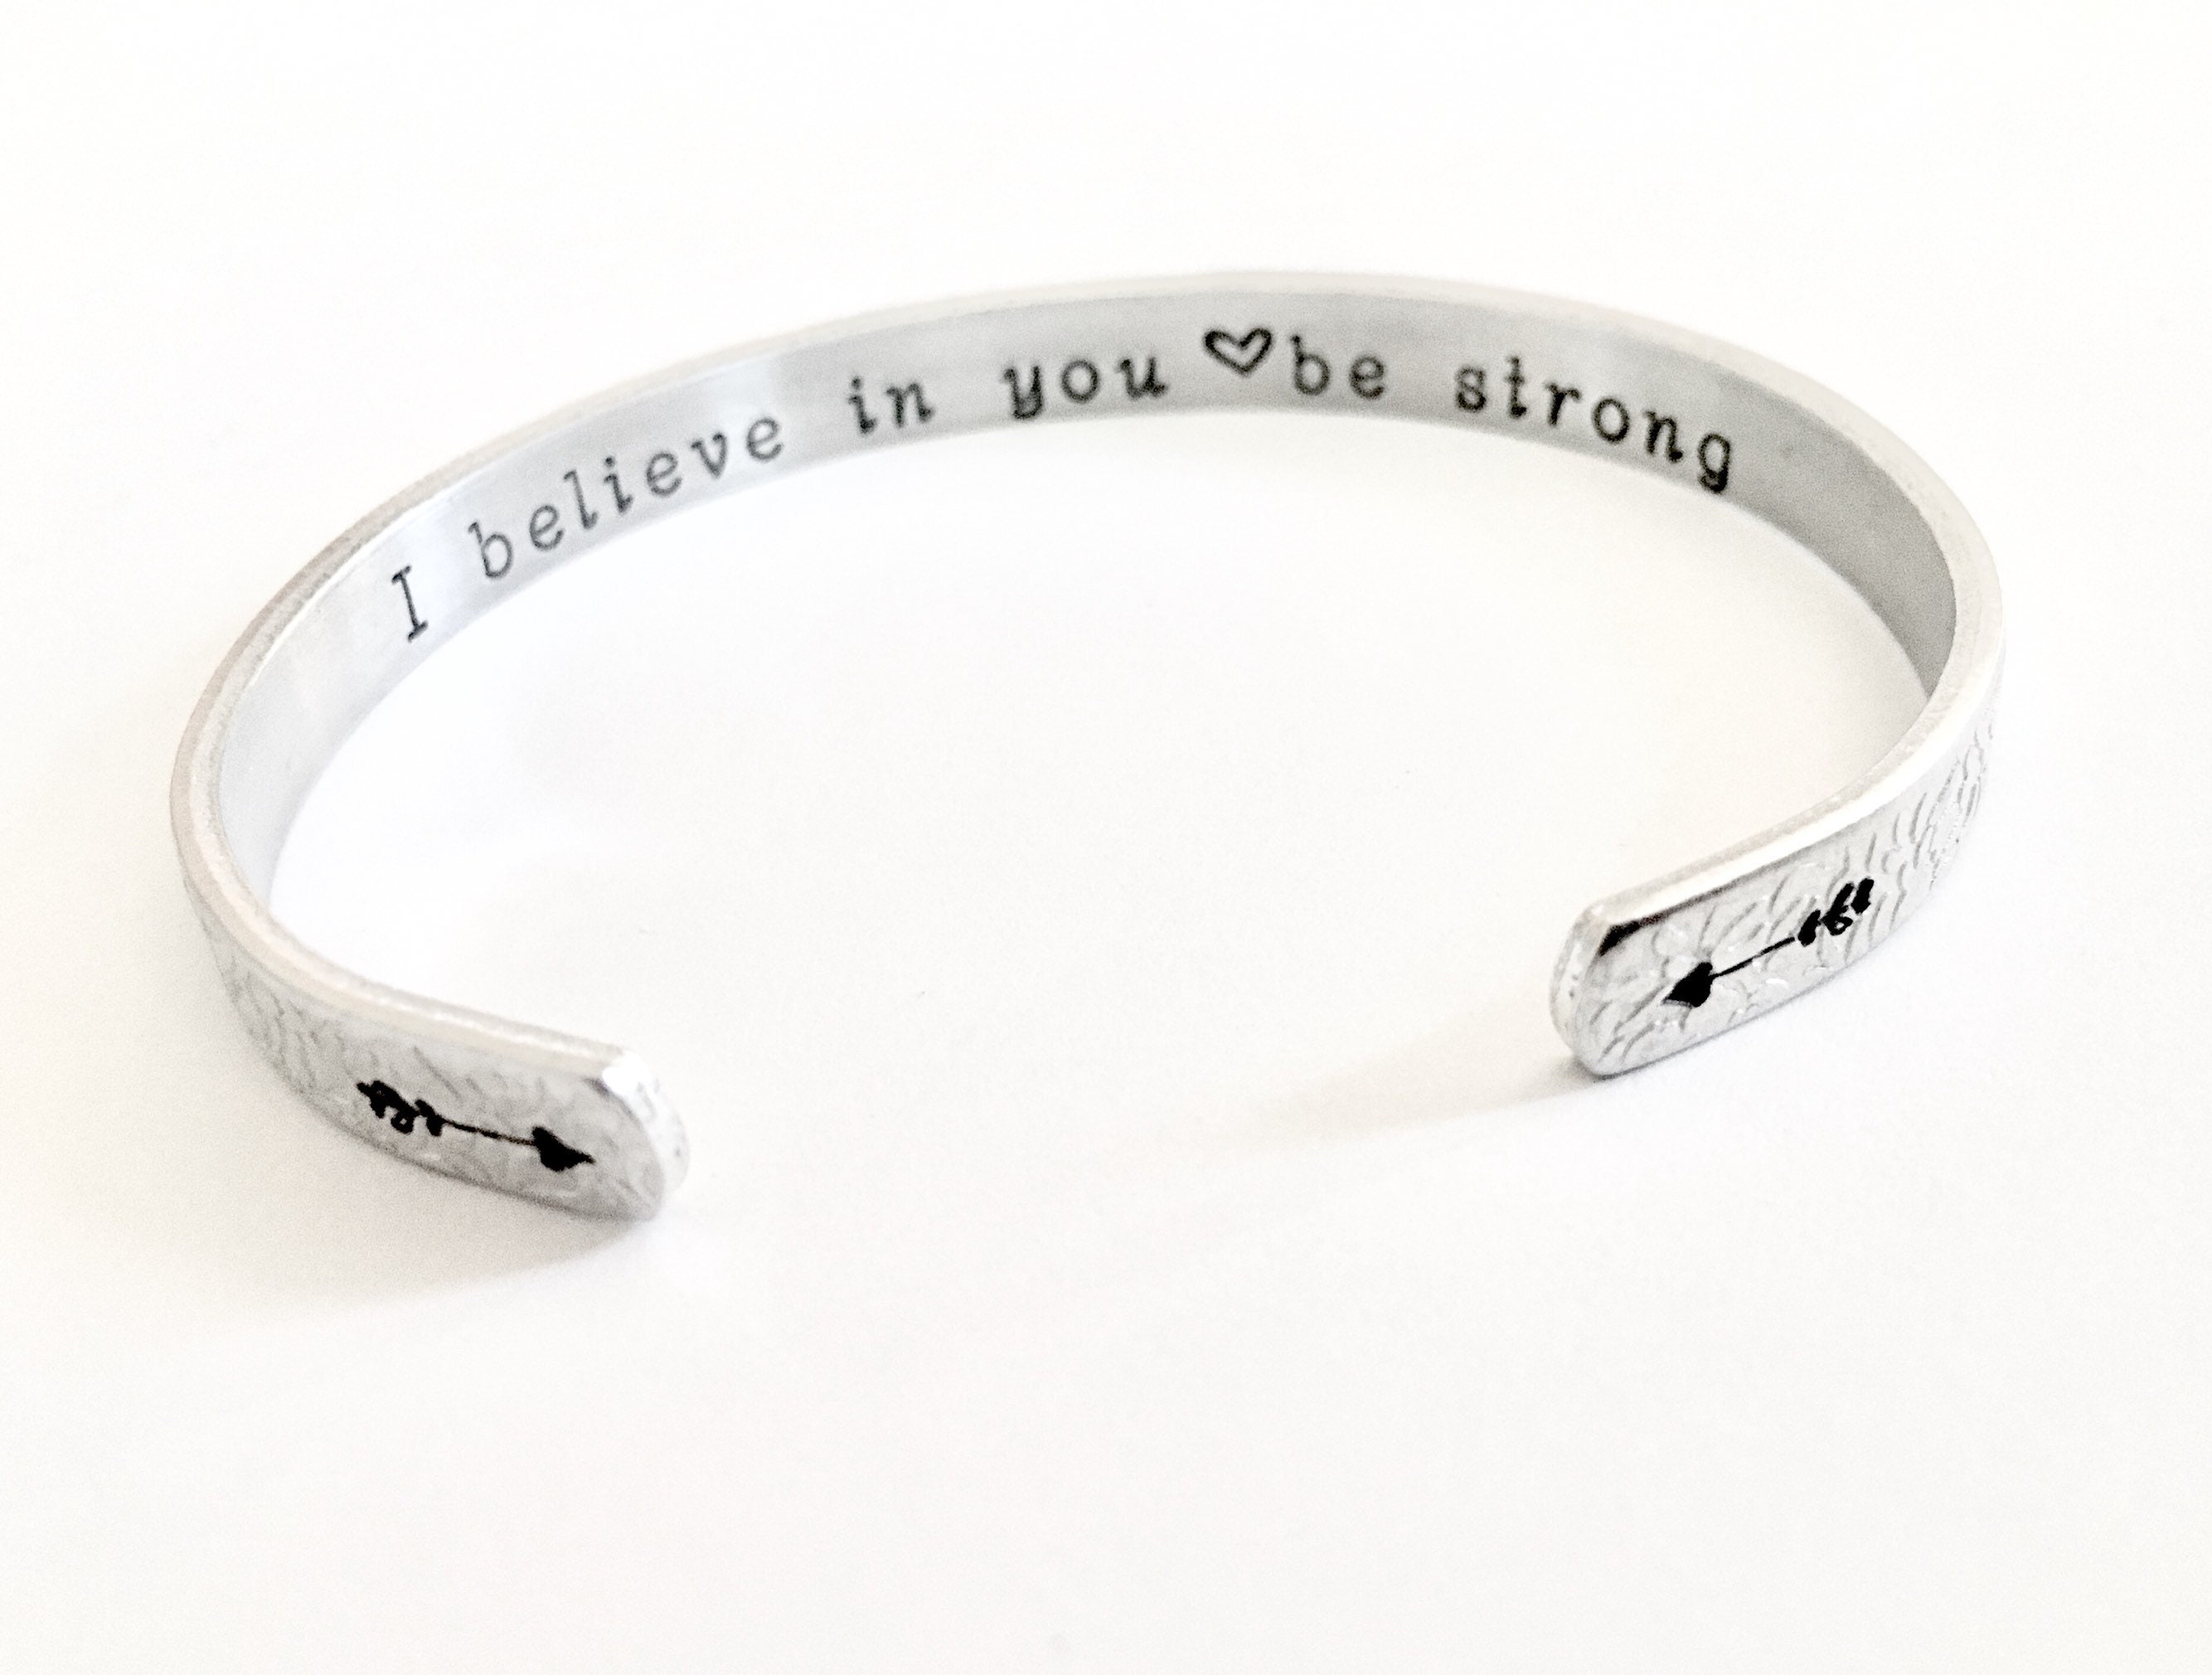 Inspirational Positive Message Bracelet. Personalize this | Etsy